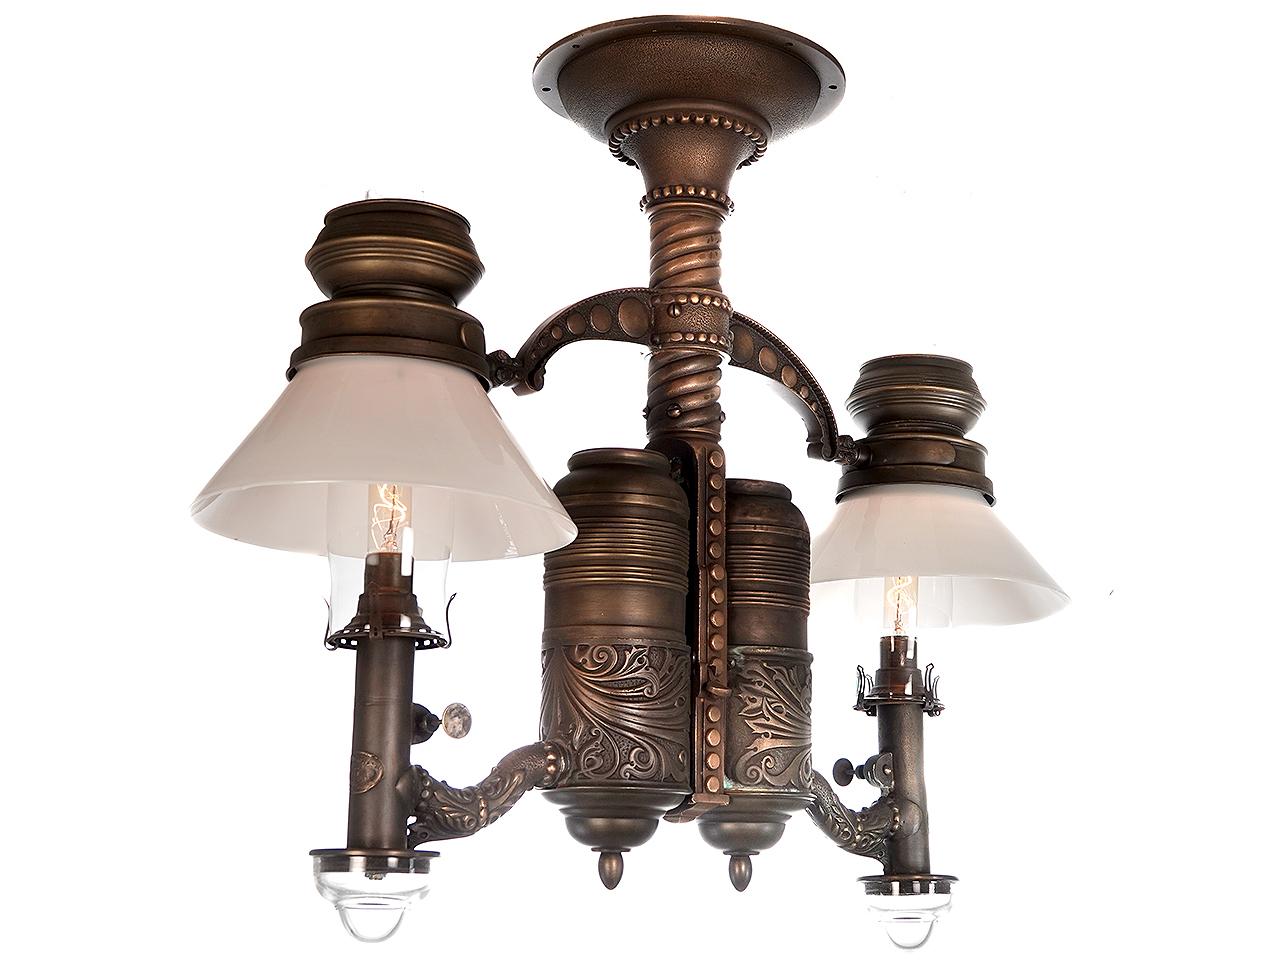 Few of these luxury class Victorian RR lamps still exist. Any remaining examples have found their way into museums and RR car restorations. This is a beautiful original double chandelier still retaining its lift out tank and valve. It also has the